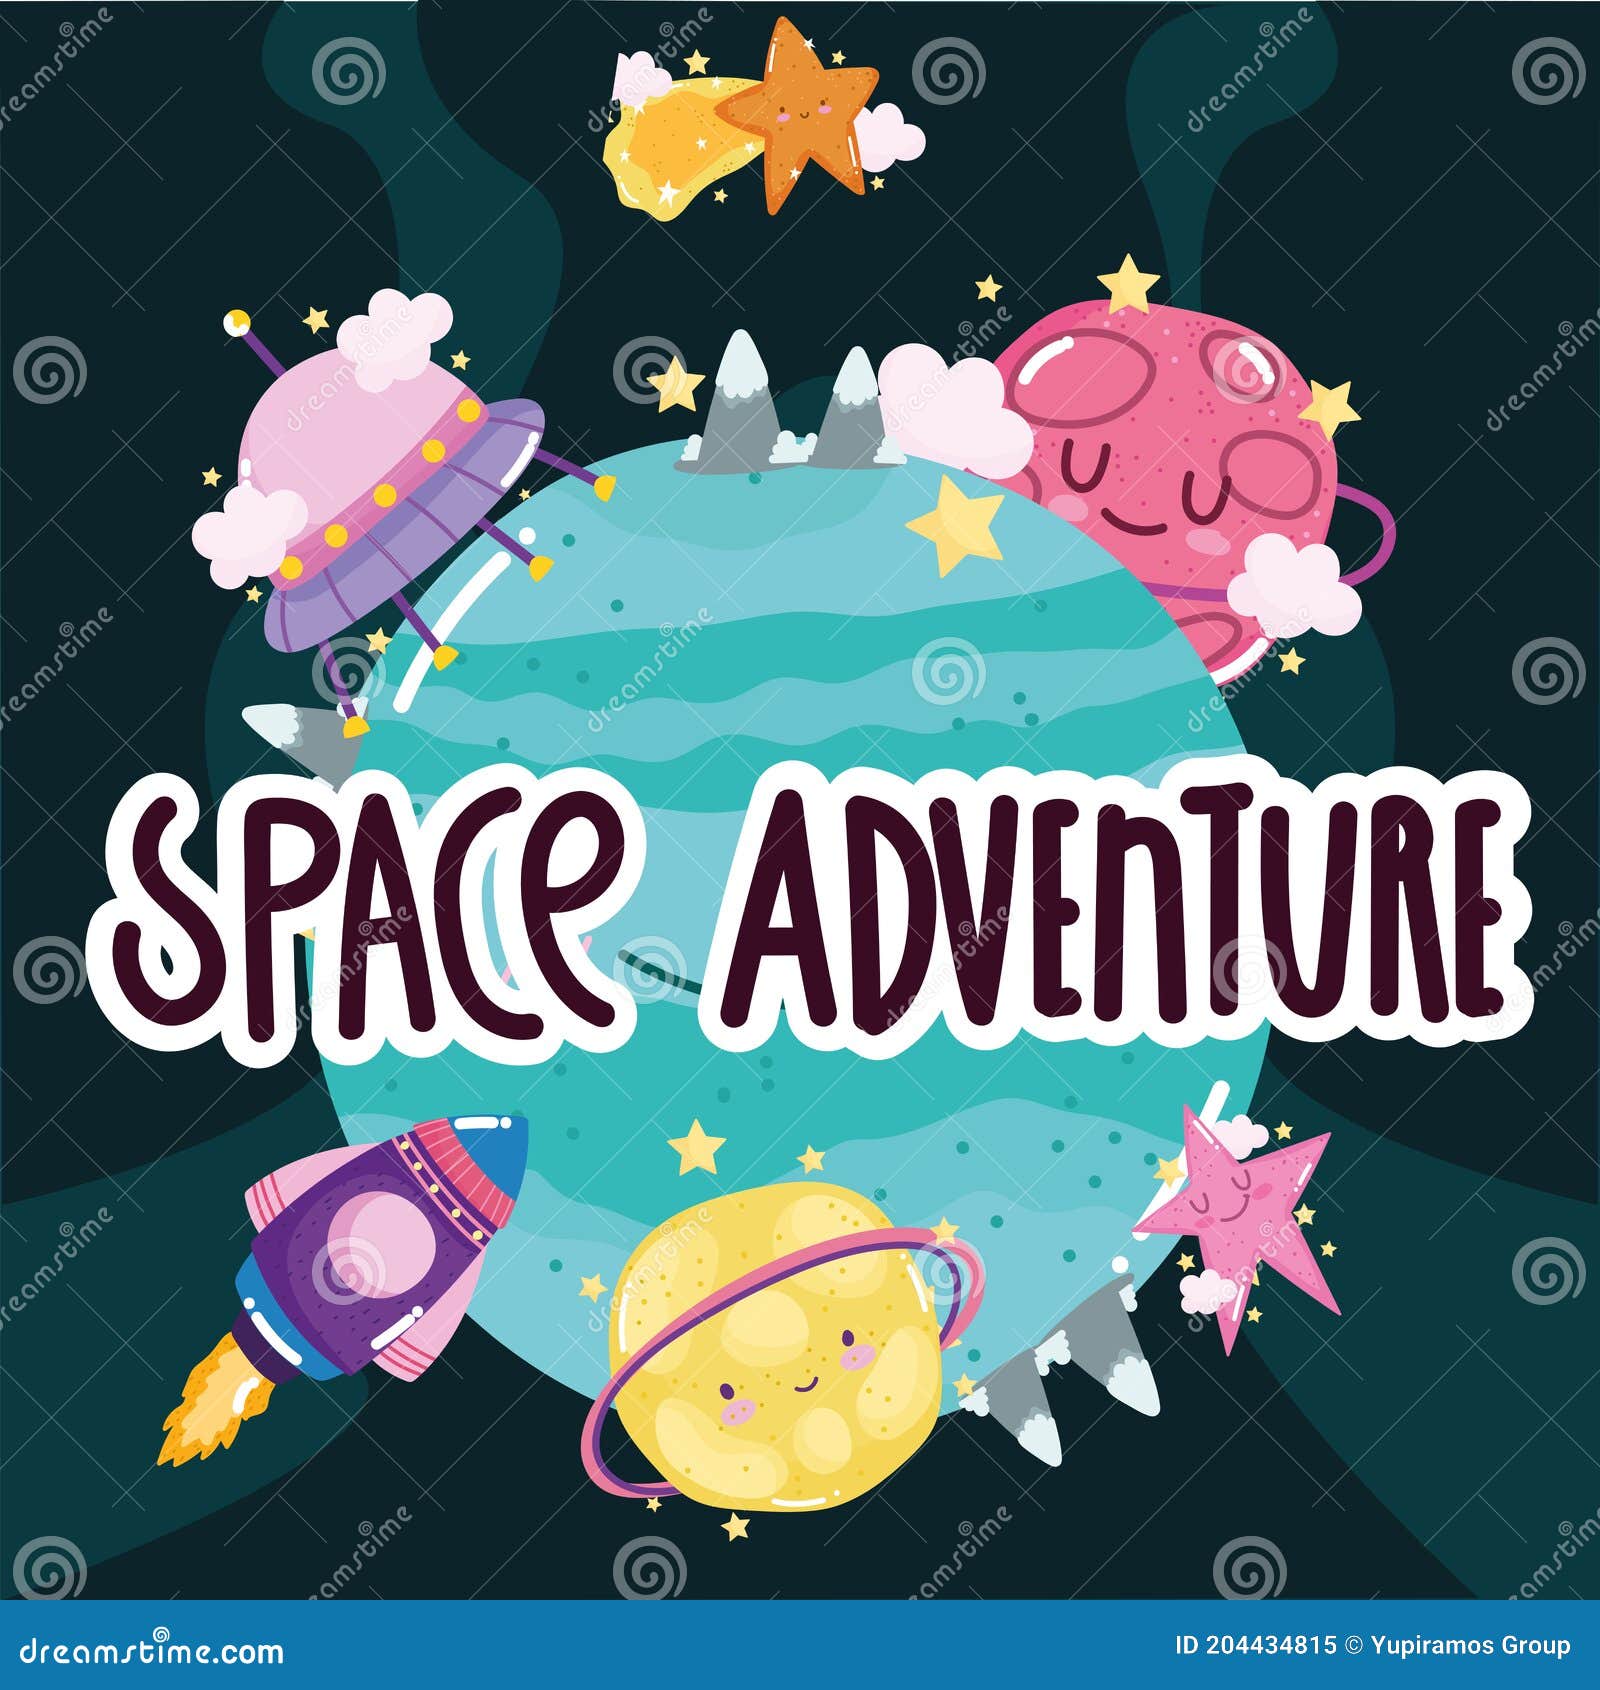 Space Adventure Spacecraft Planet Ufo Star Surface Explore Cute Cartoon  Stock Vector - Illustration of star, flying: 204434815